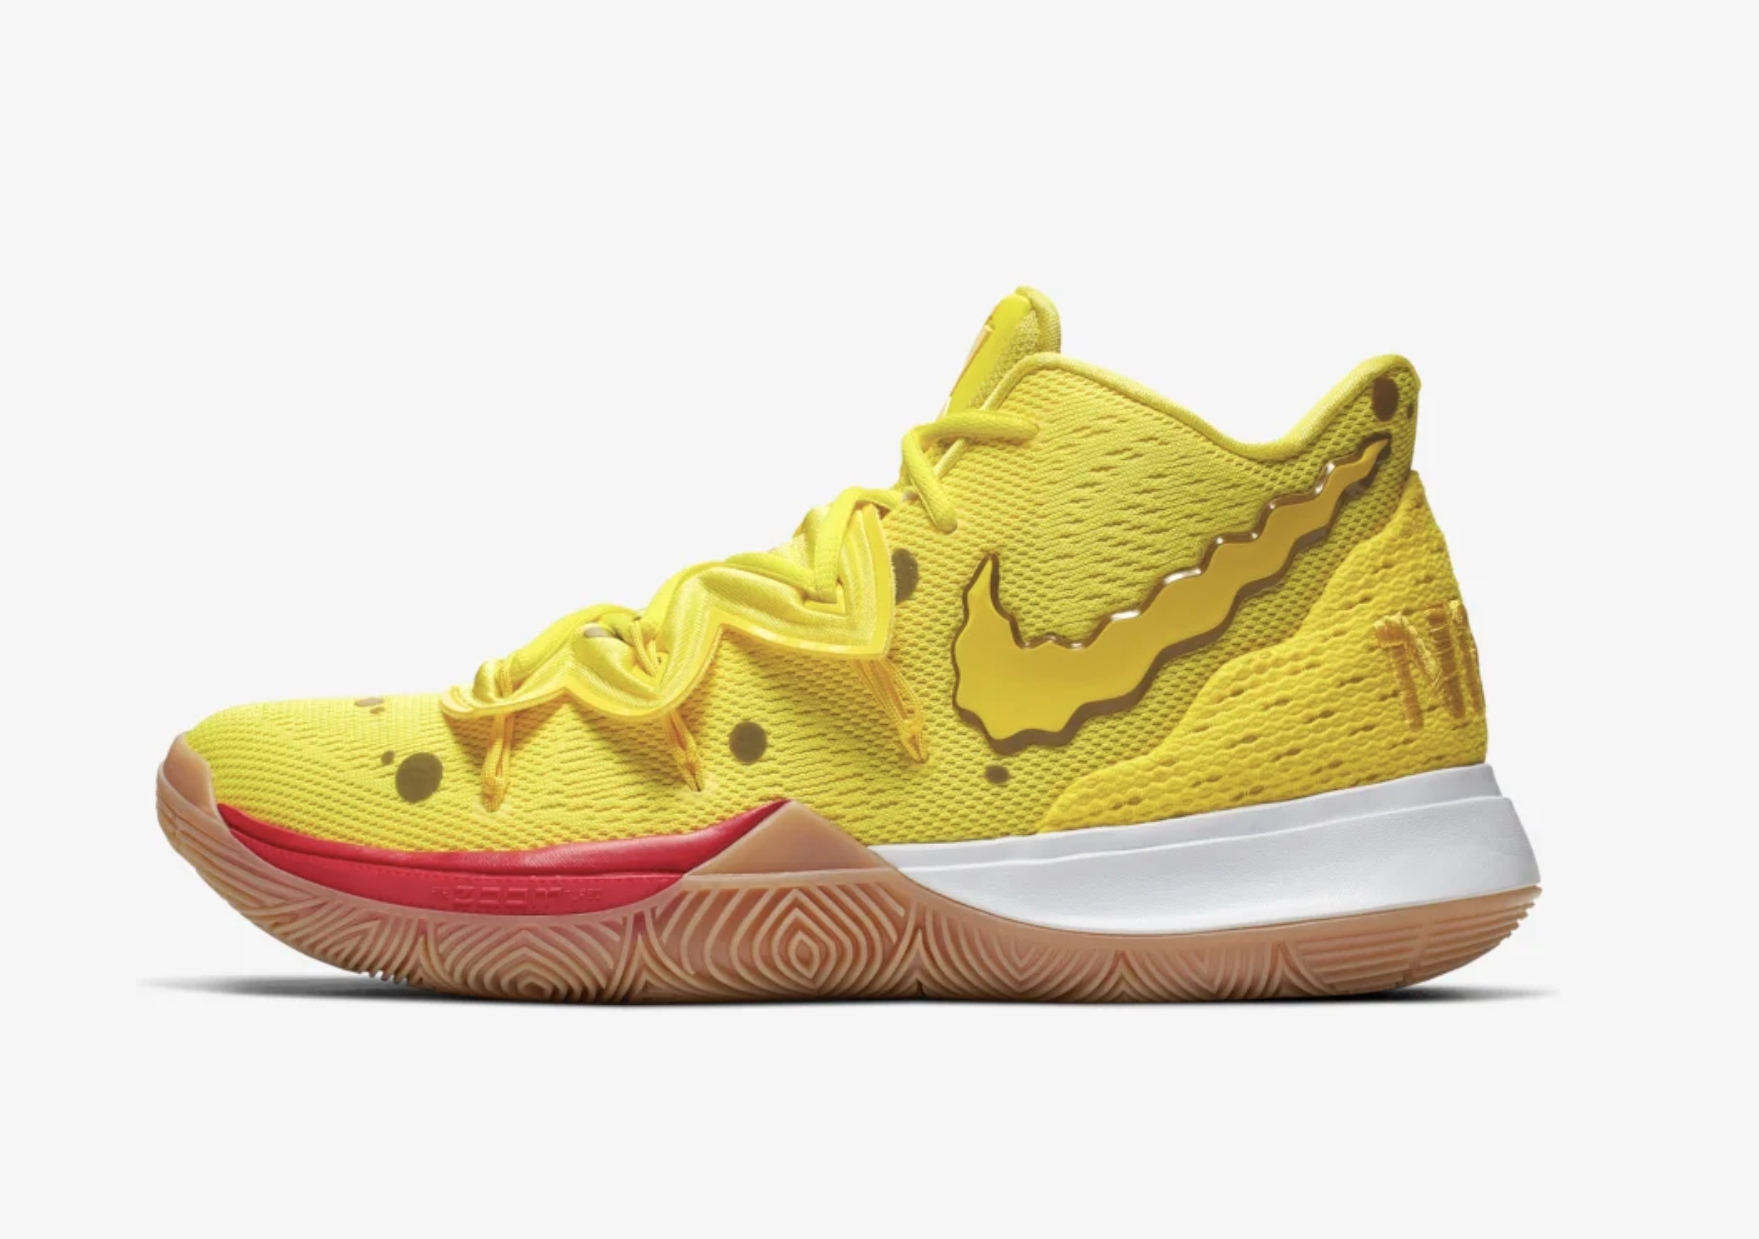 kyrie spongebob collection for sale